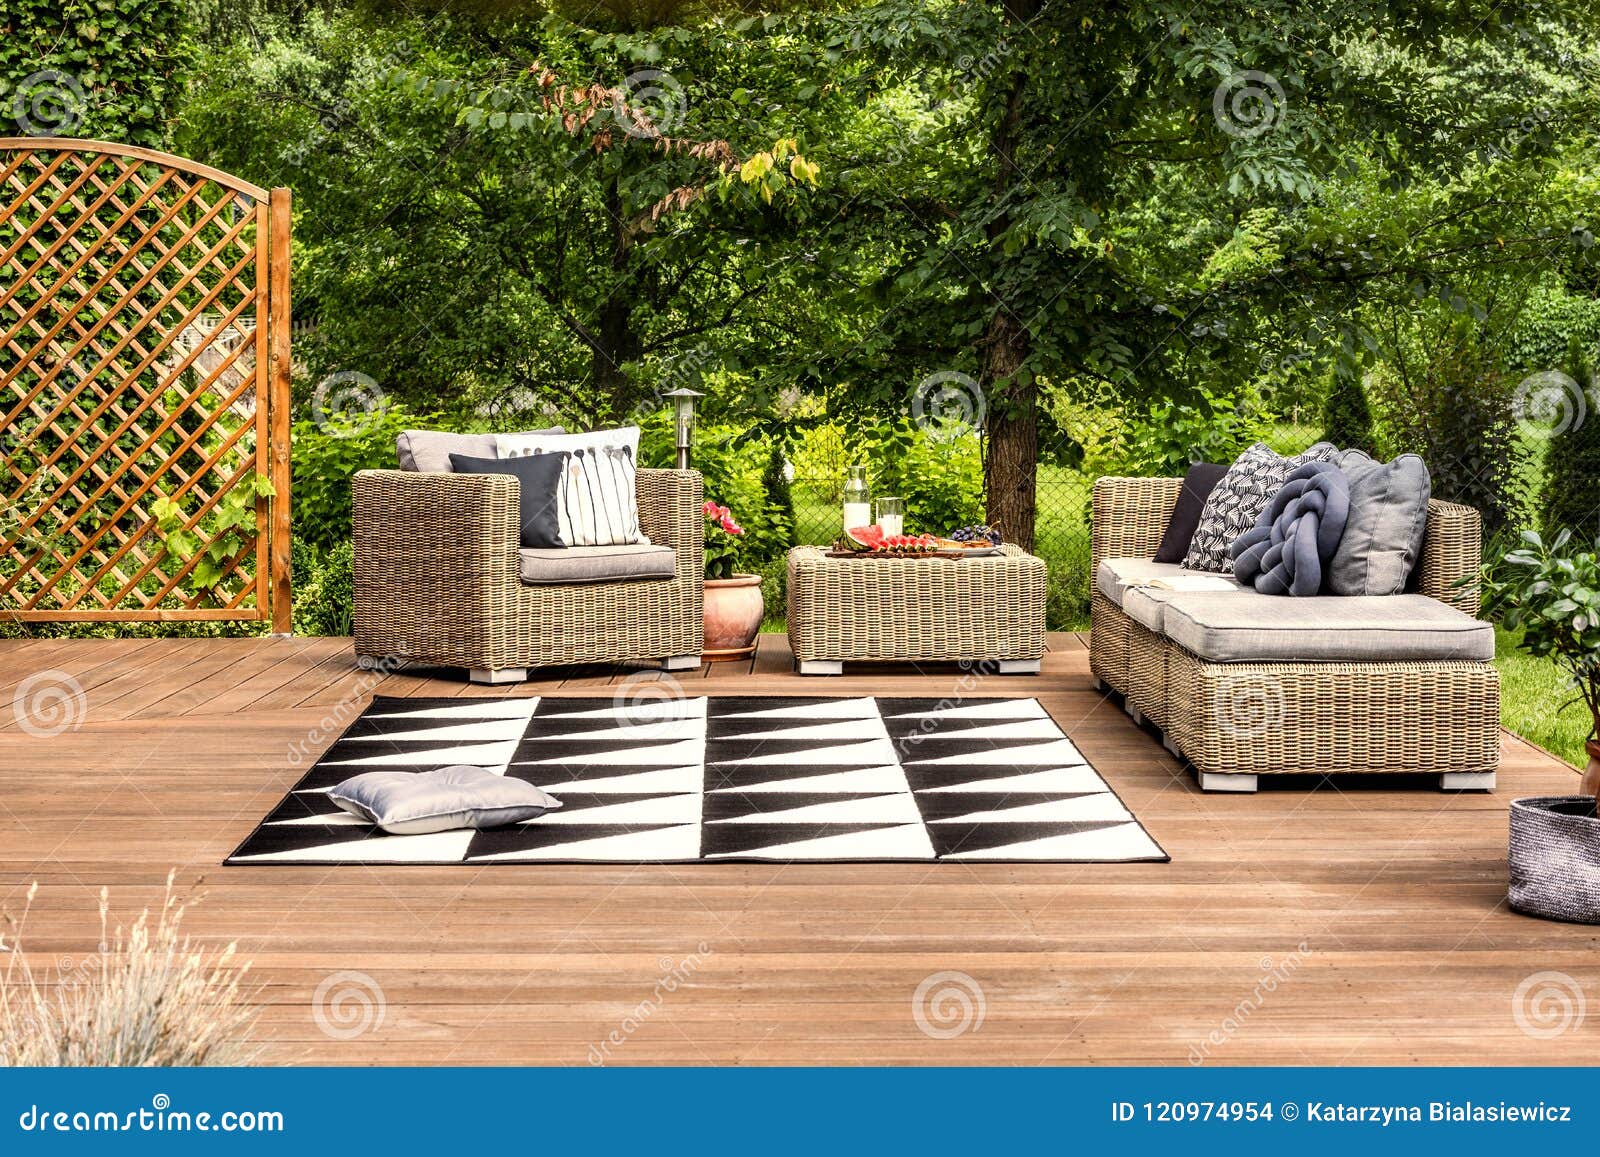 geometrical rug and rattan furniture set on a terrace in a garden full of trees